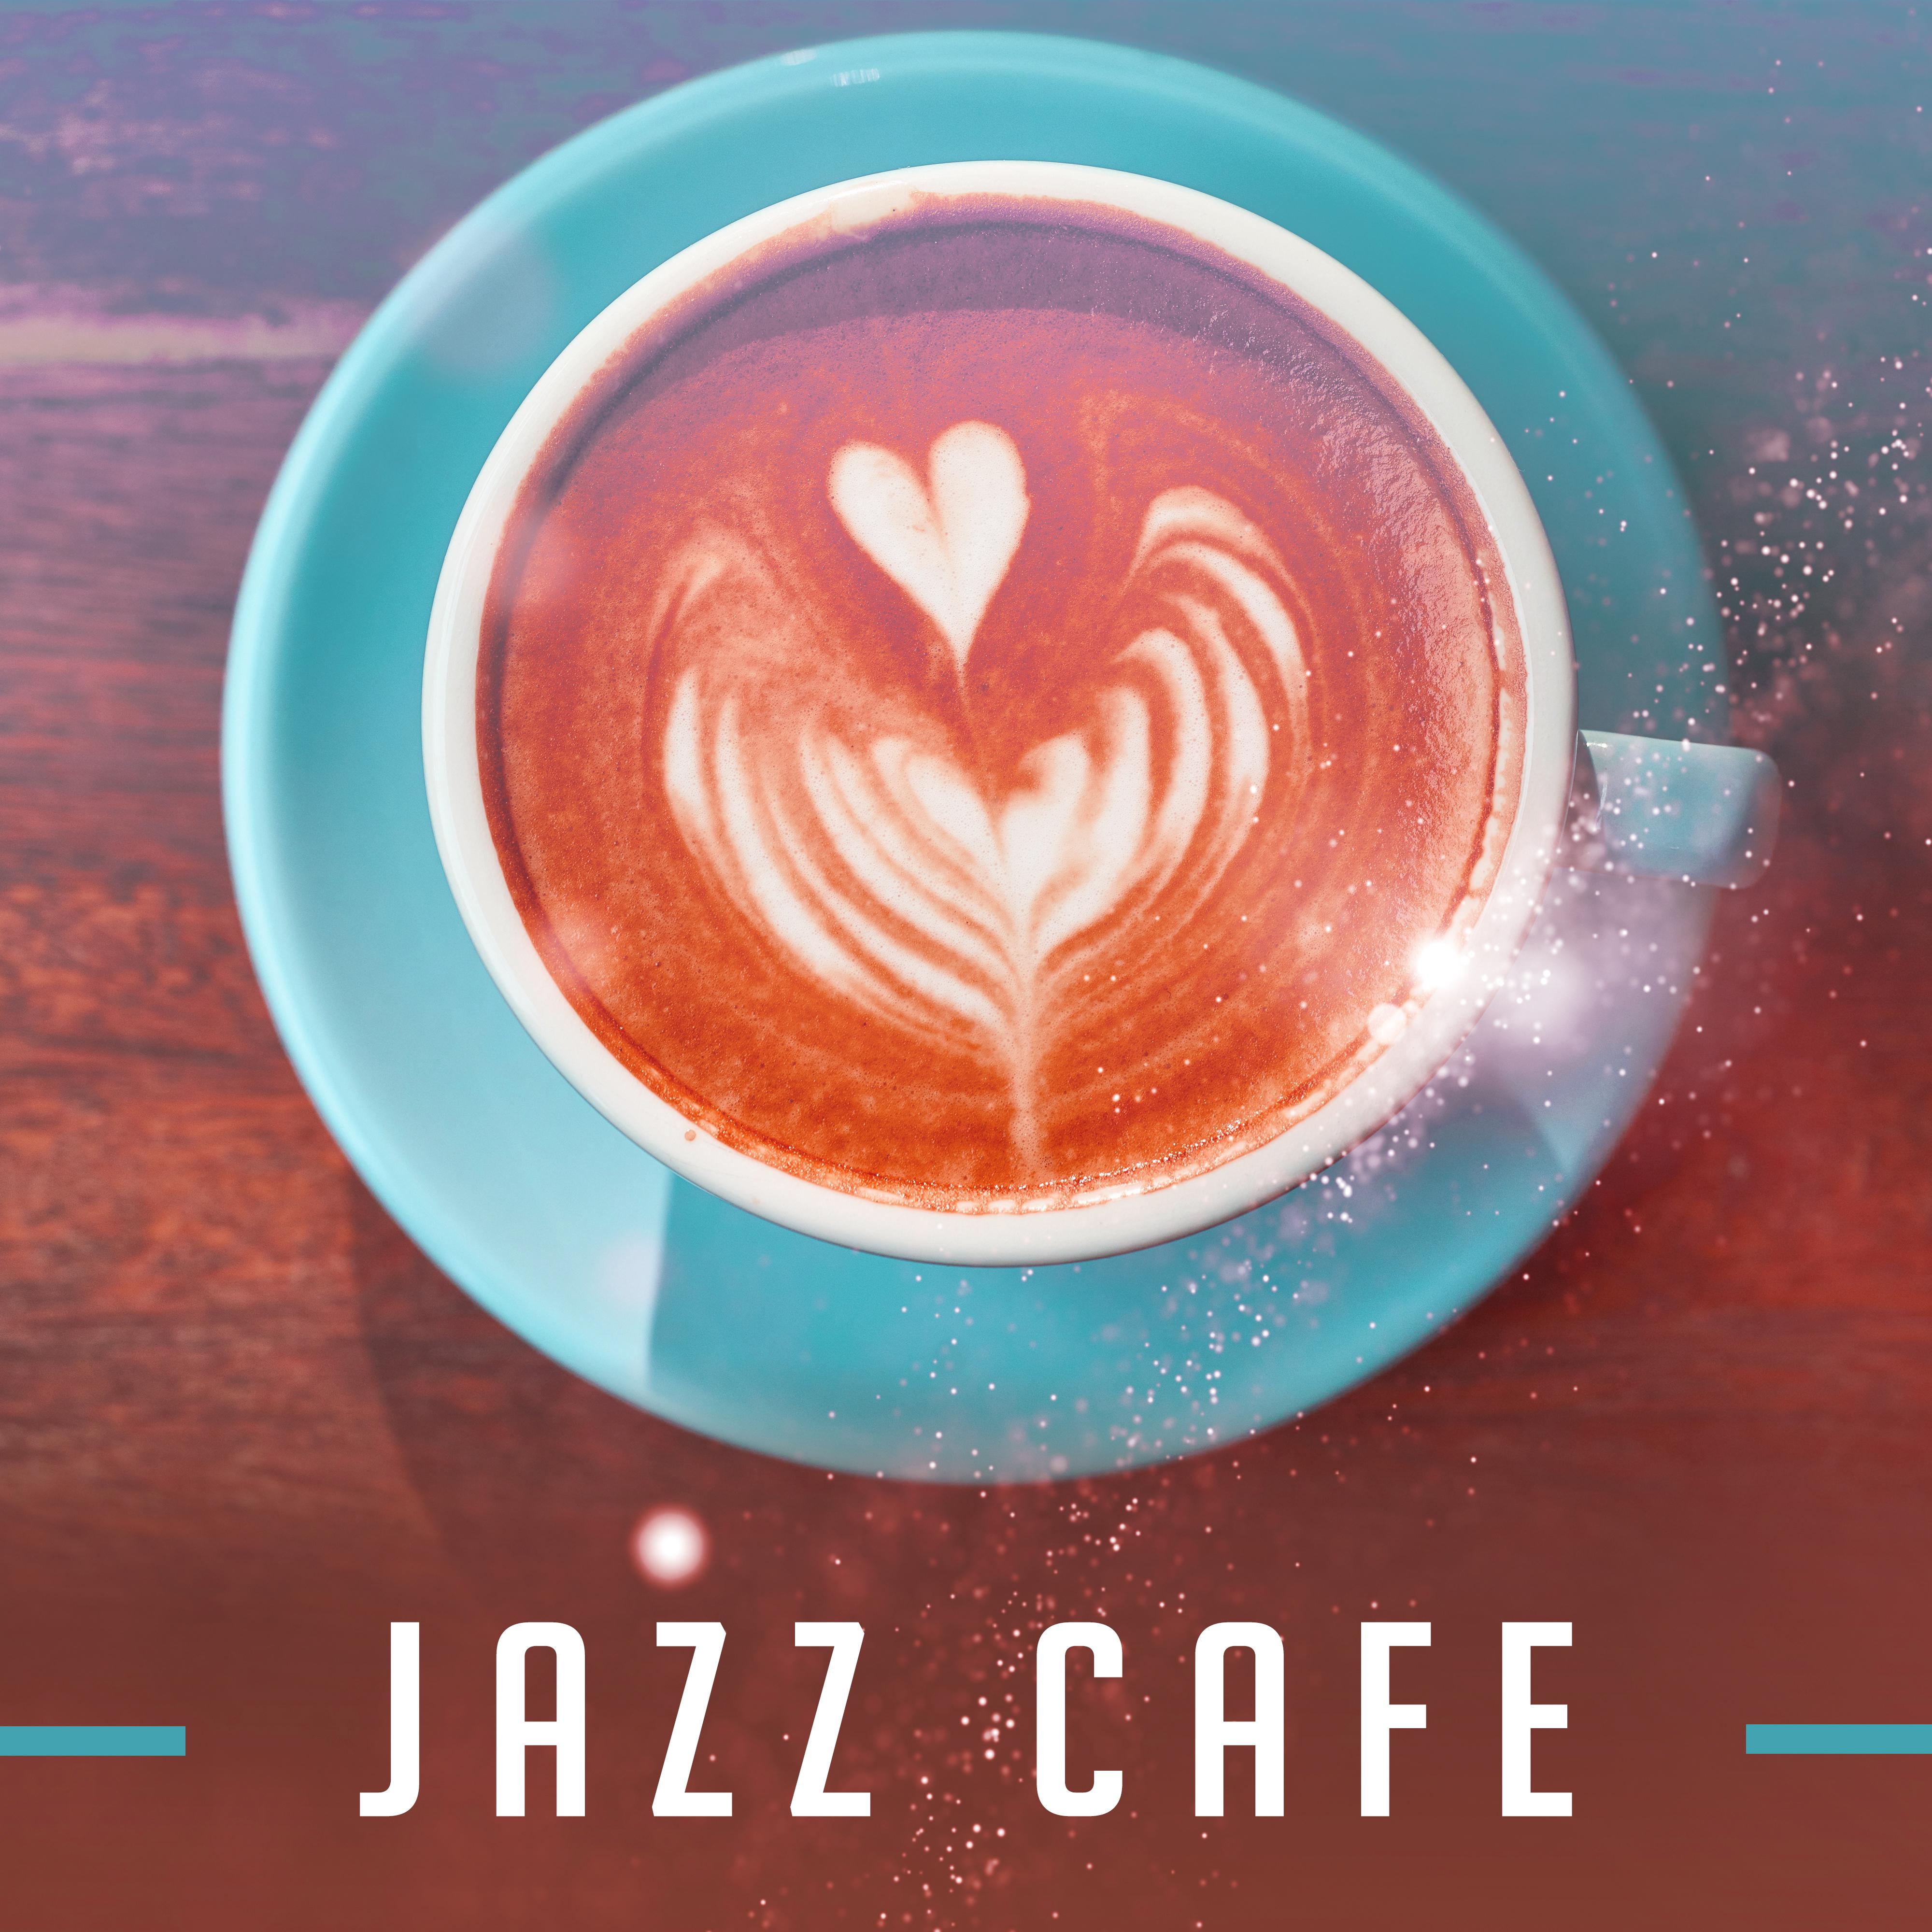 Jazz Cafe – Instrumental Music for Restaurant, Pure Relaxation, Peaceful Jazz, Calm Down, Stress Relief, Coffee Talk